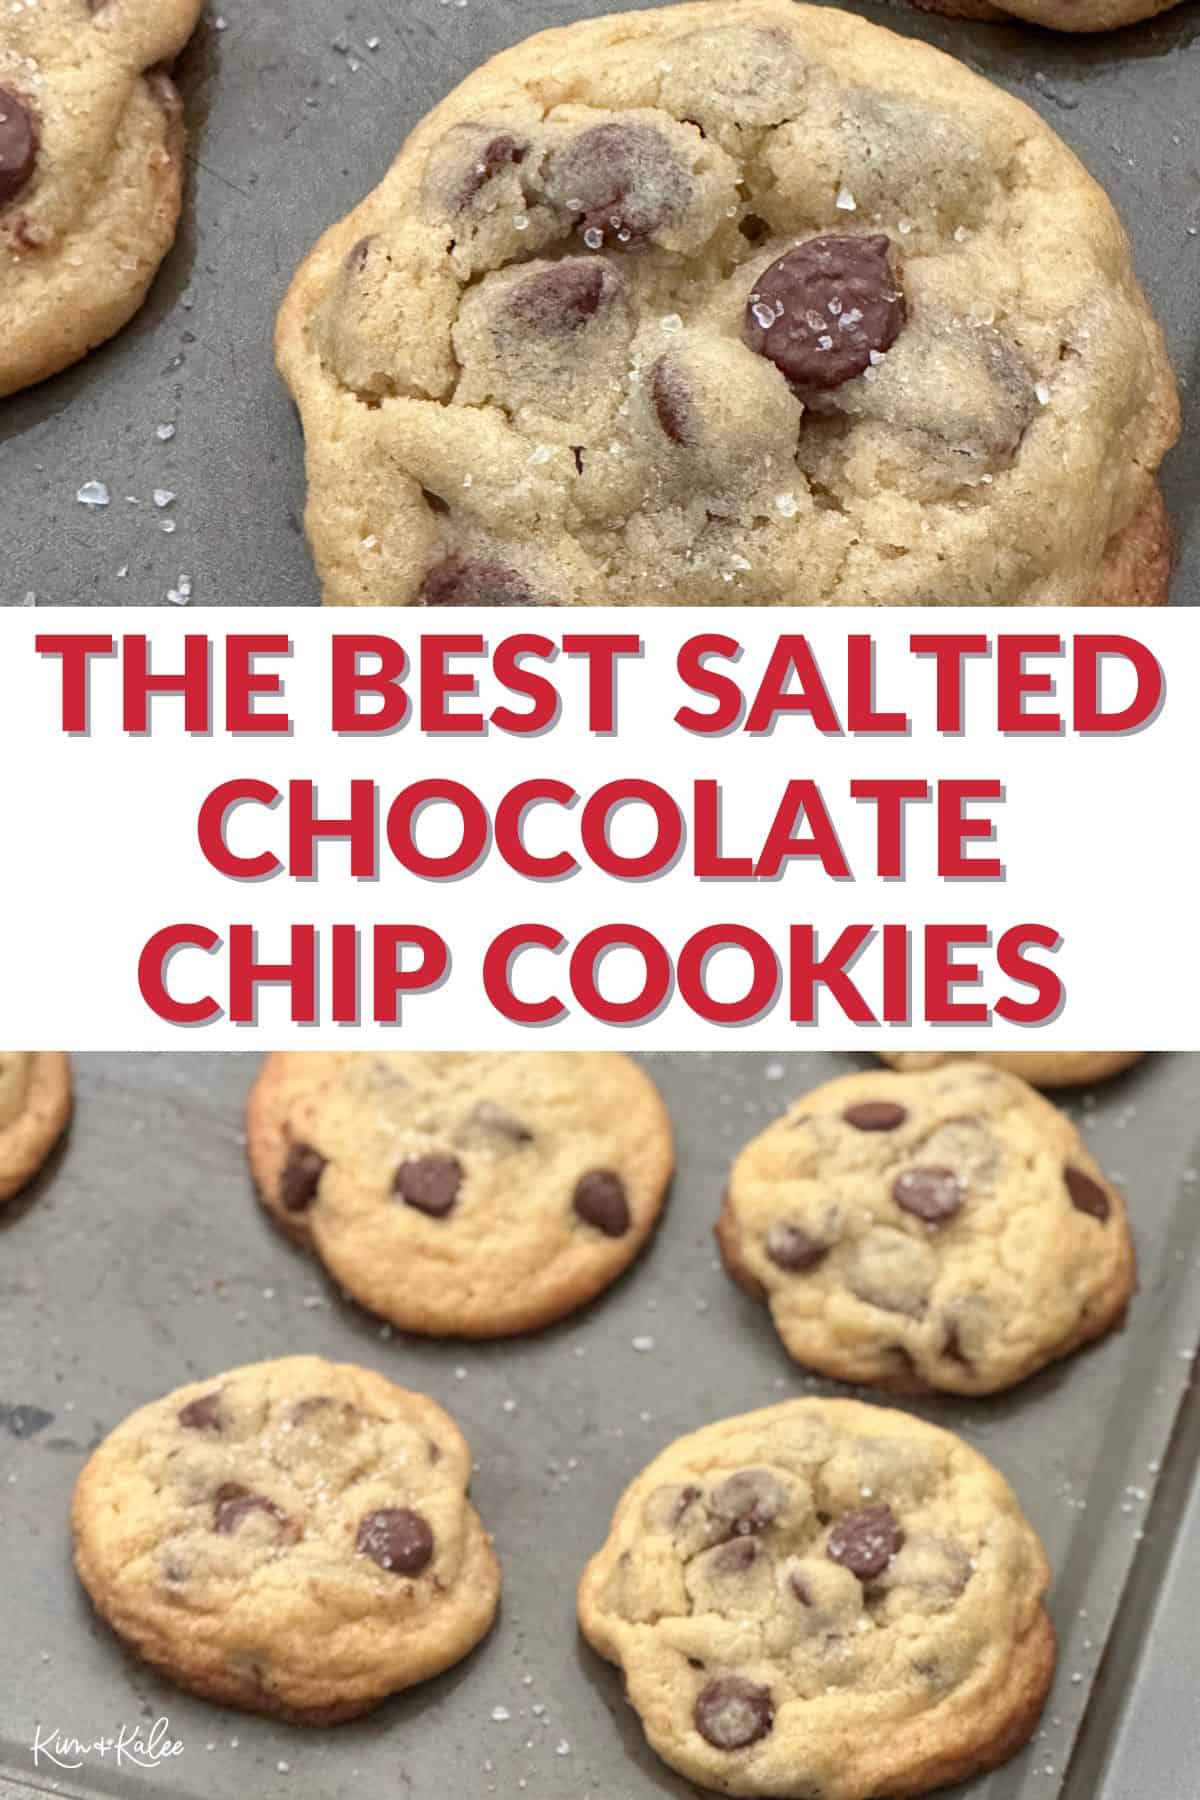 collage of the cookies with the text overlay in the middle that says The Best Salted Chocolate Chip Cookies